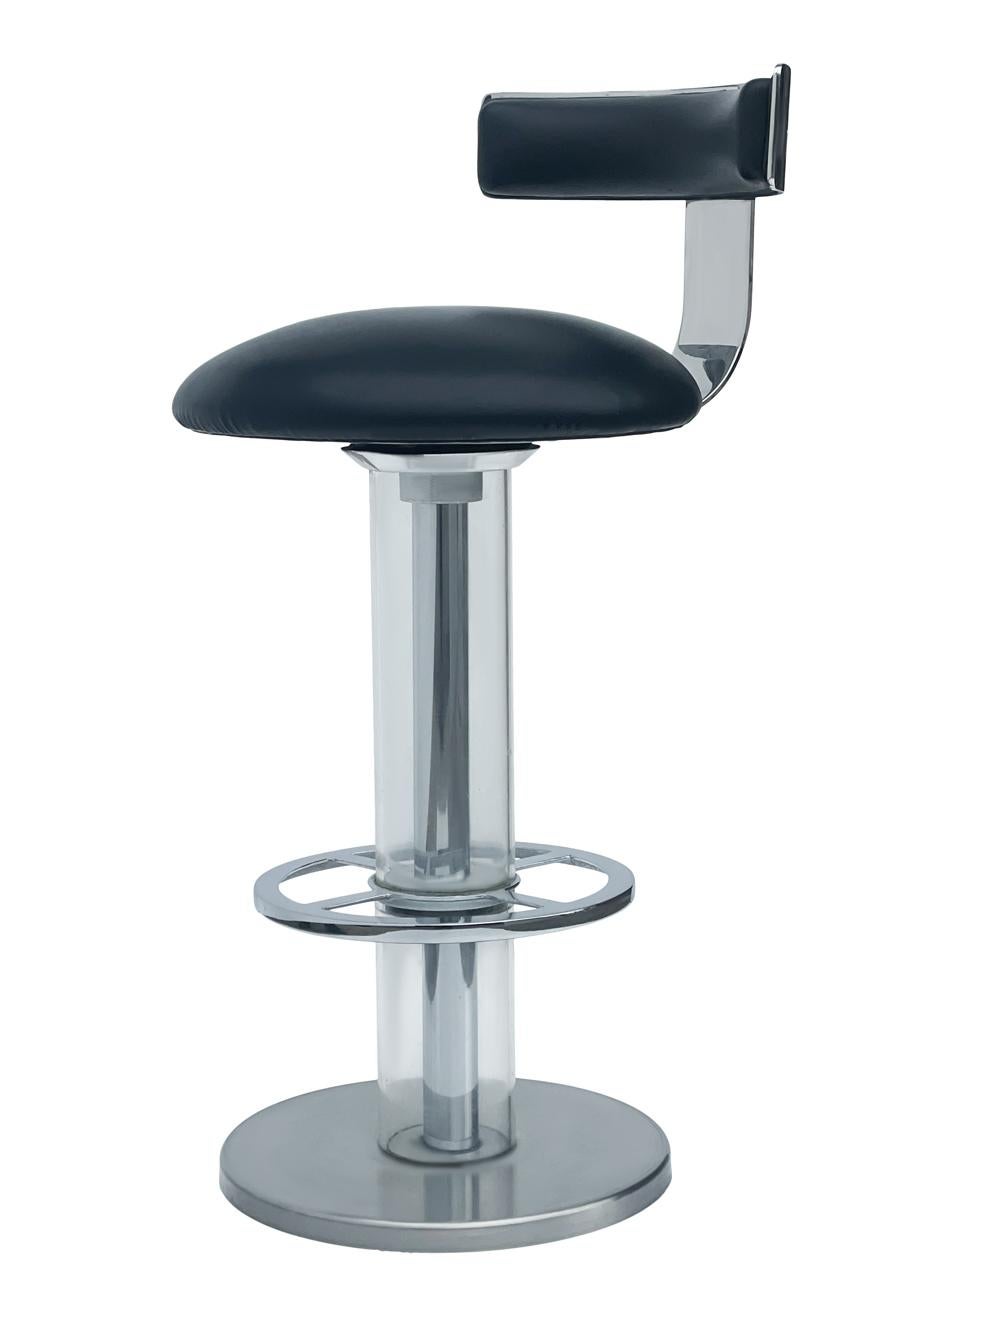 Late 20th Century Pair of Mid-Century Modern Bar Stools in Chrome & Black by Design For Leisure